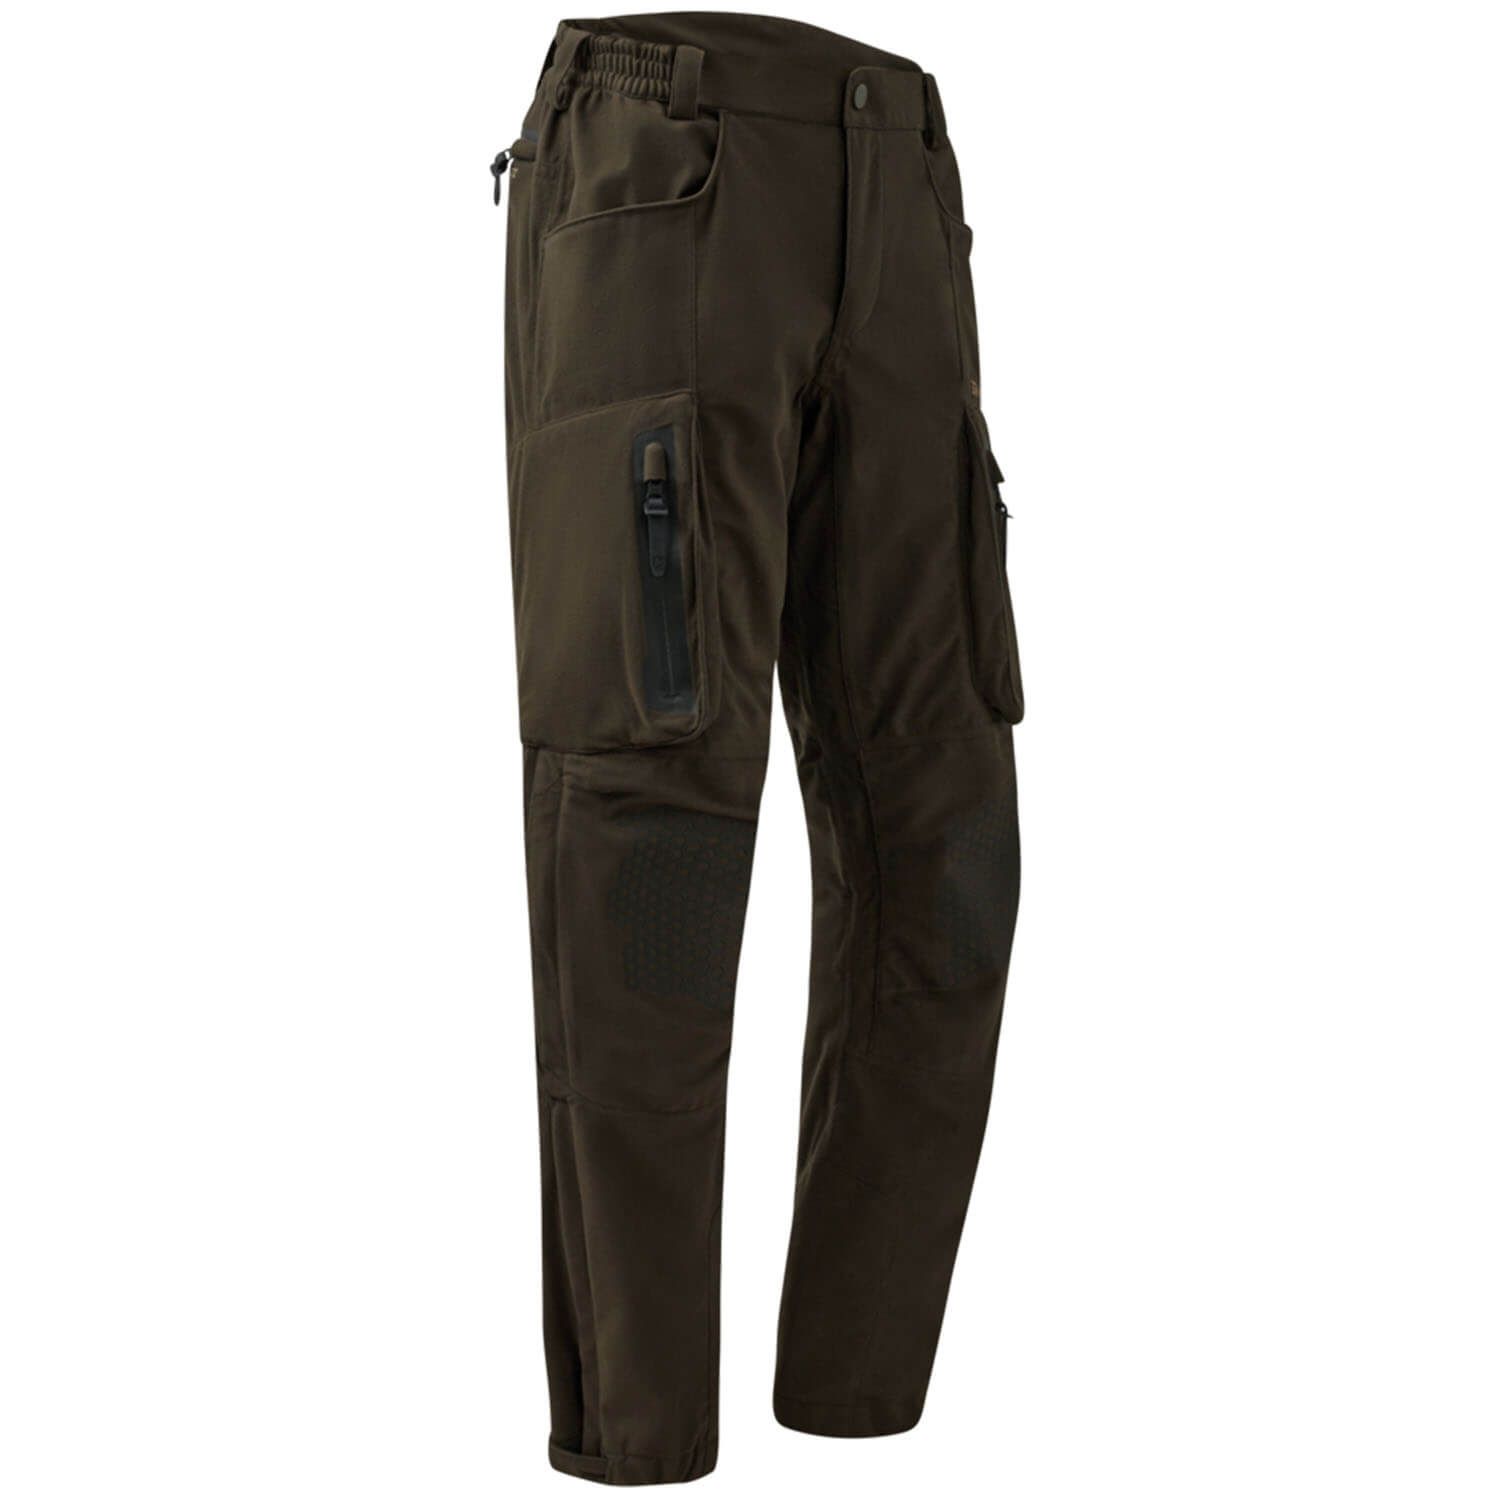  Deerhunter Game Pro Light hunting trousers (Wood) - Hunting Trousers